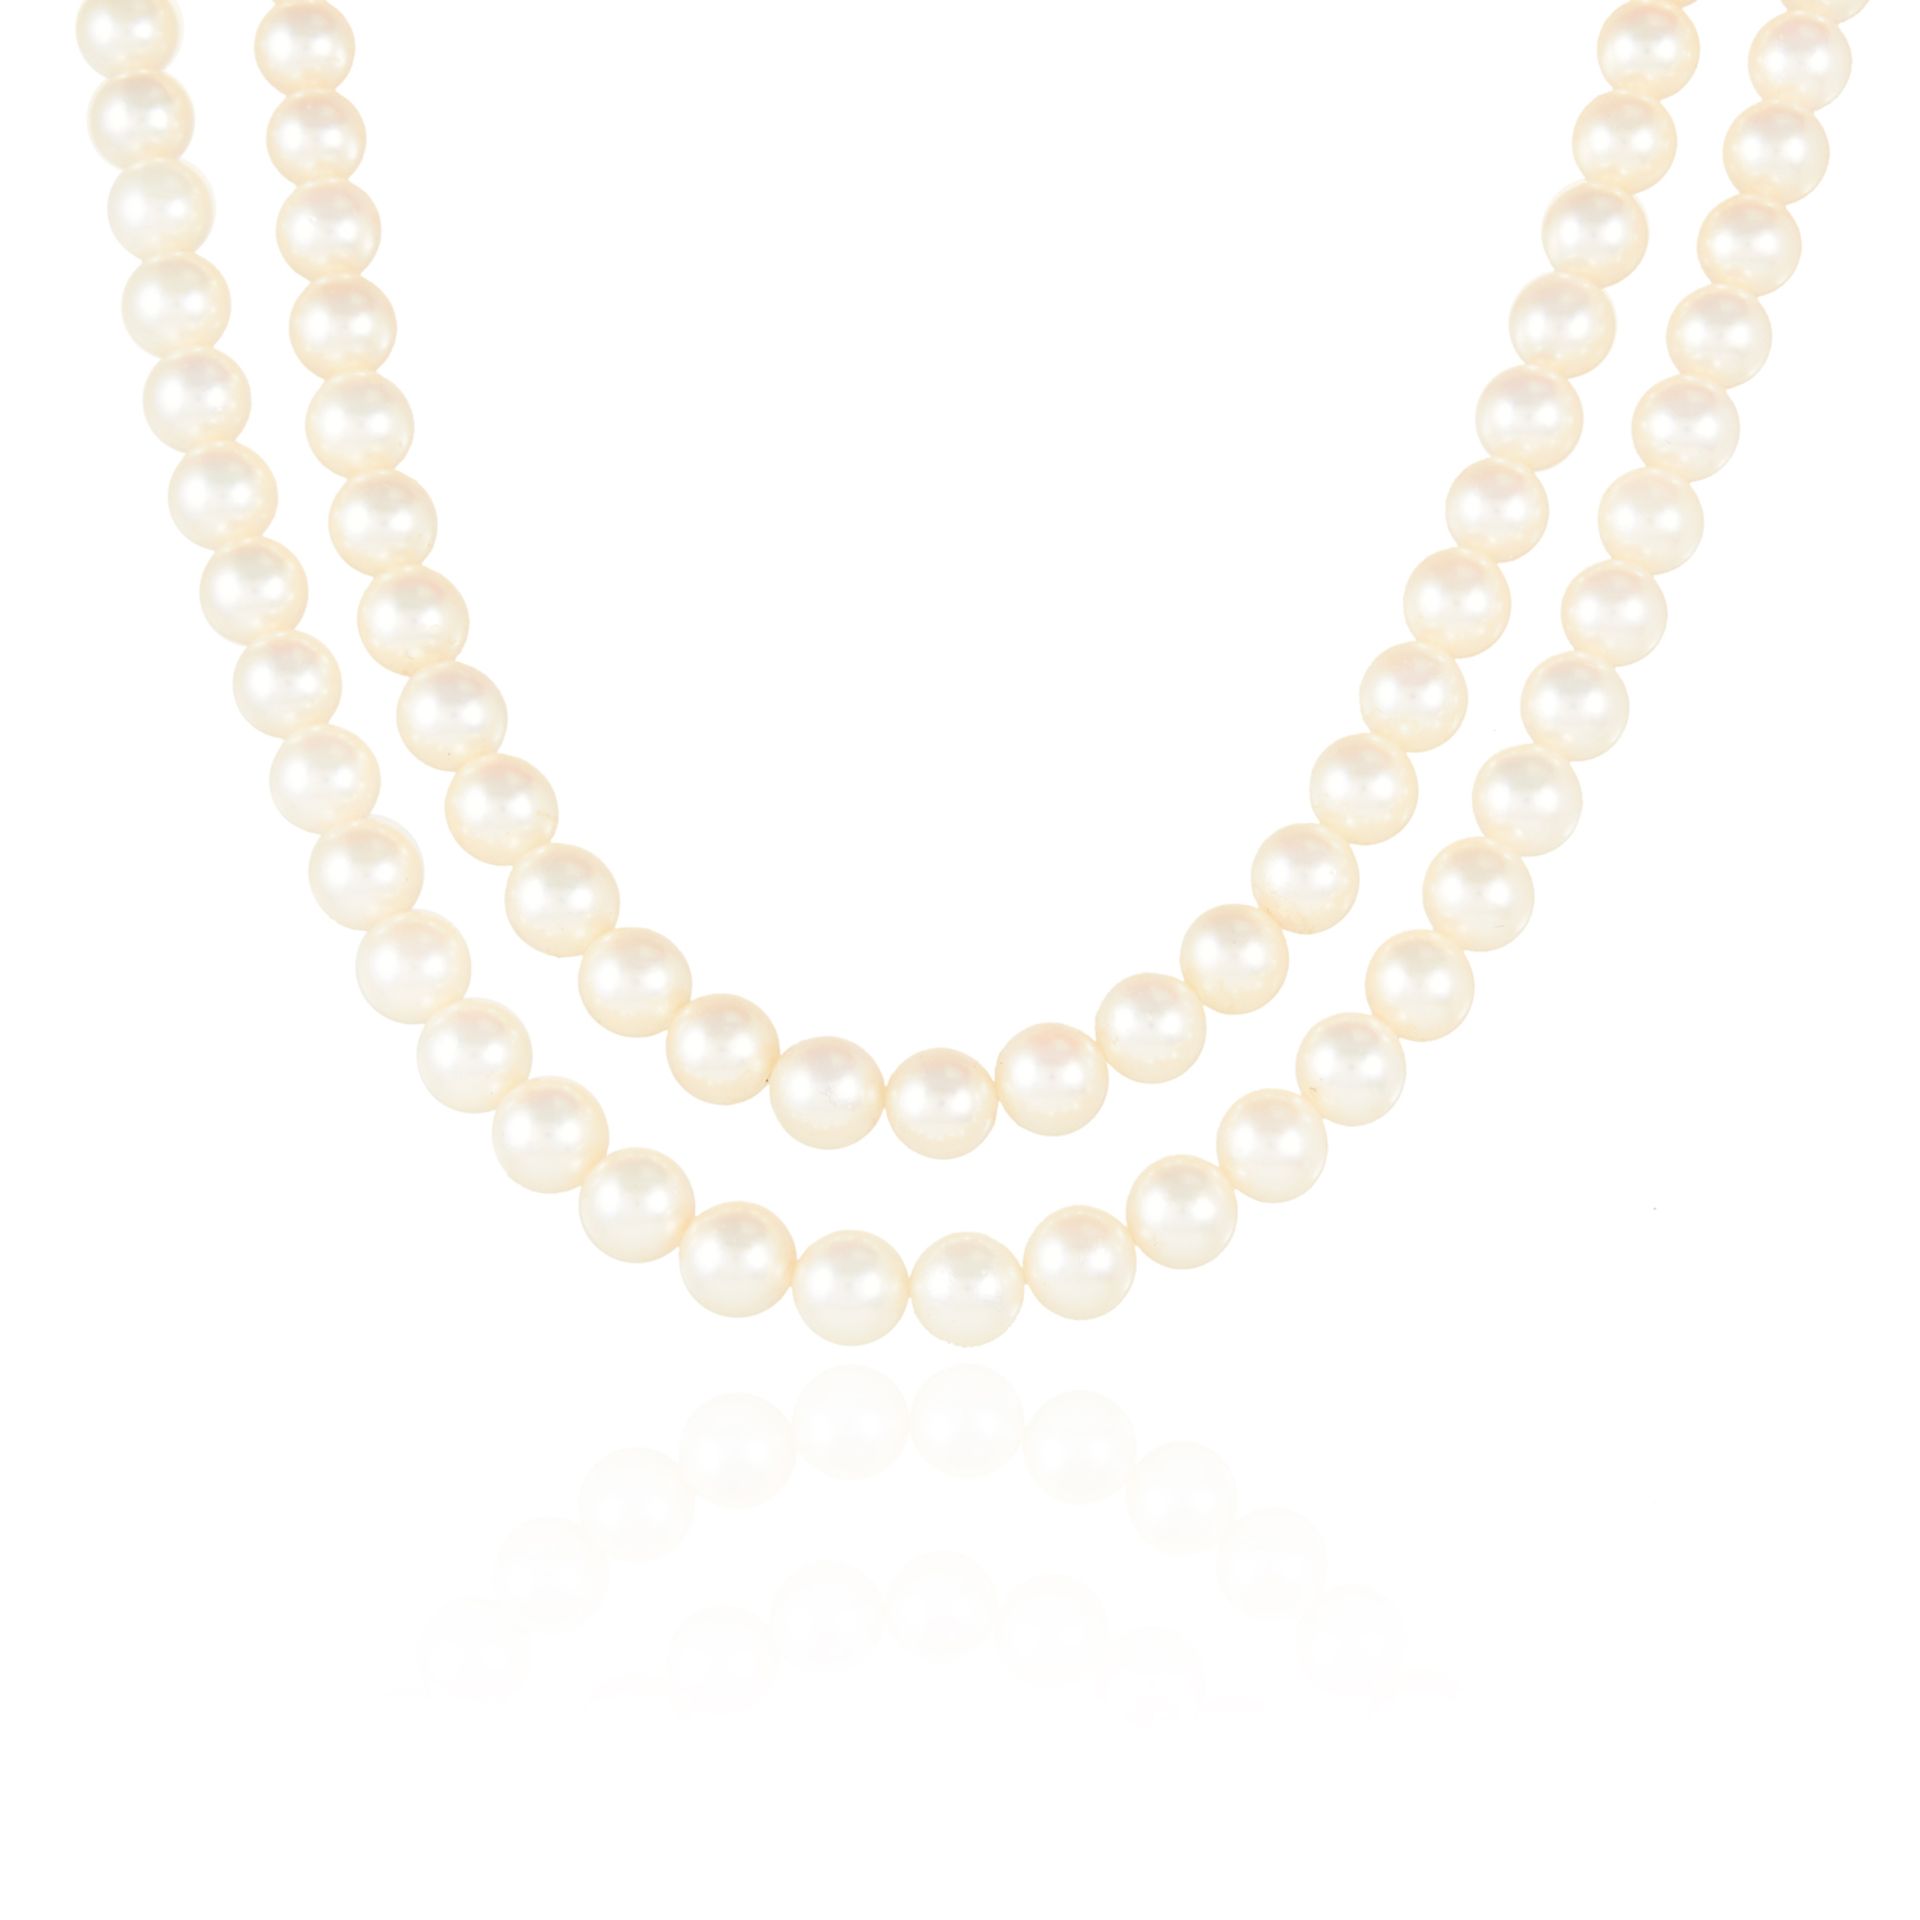 A PEARL AND DIAMOND TWO ROW NECKLACE in 18ct white gold, comprising two rows of pearls on a pearl